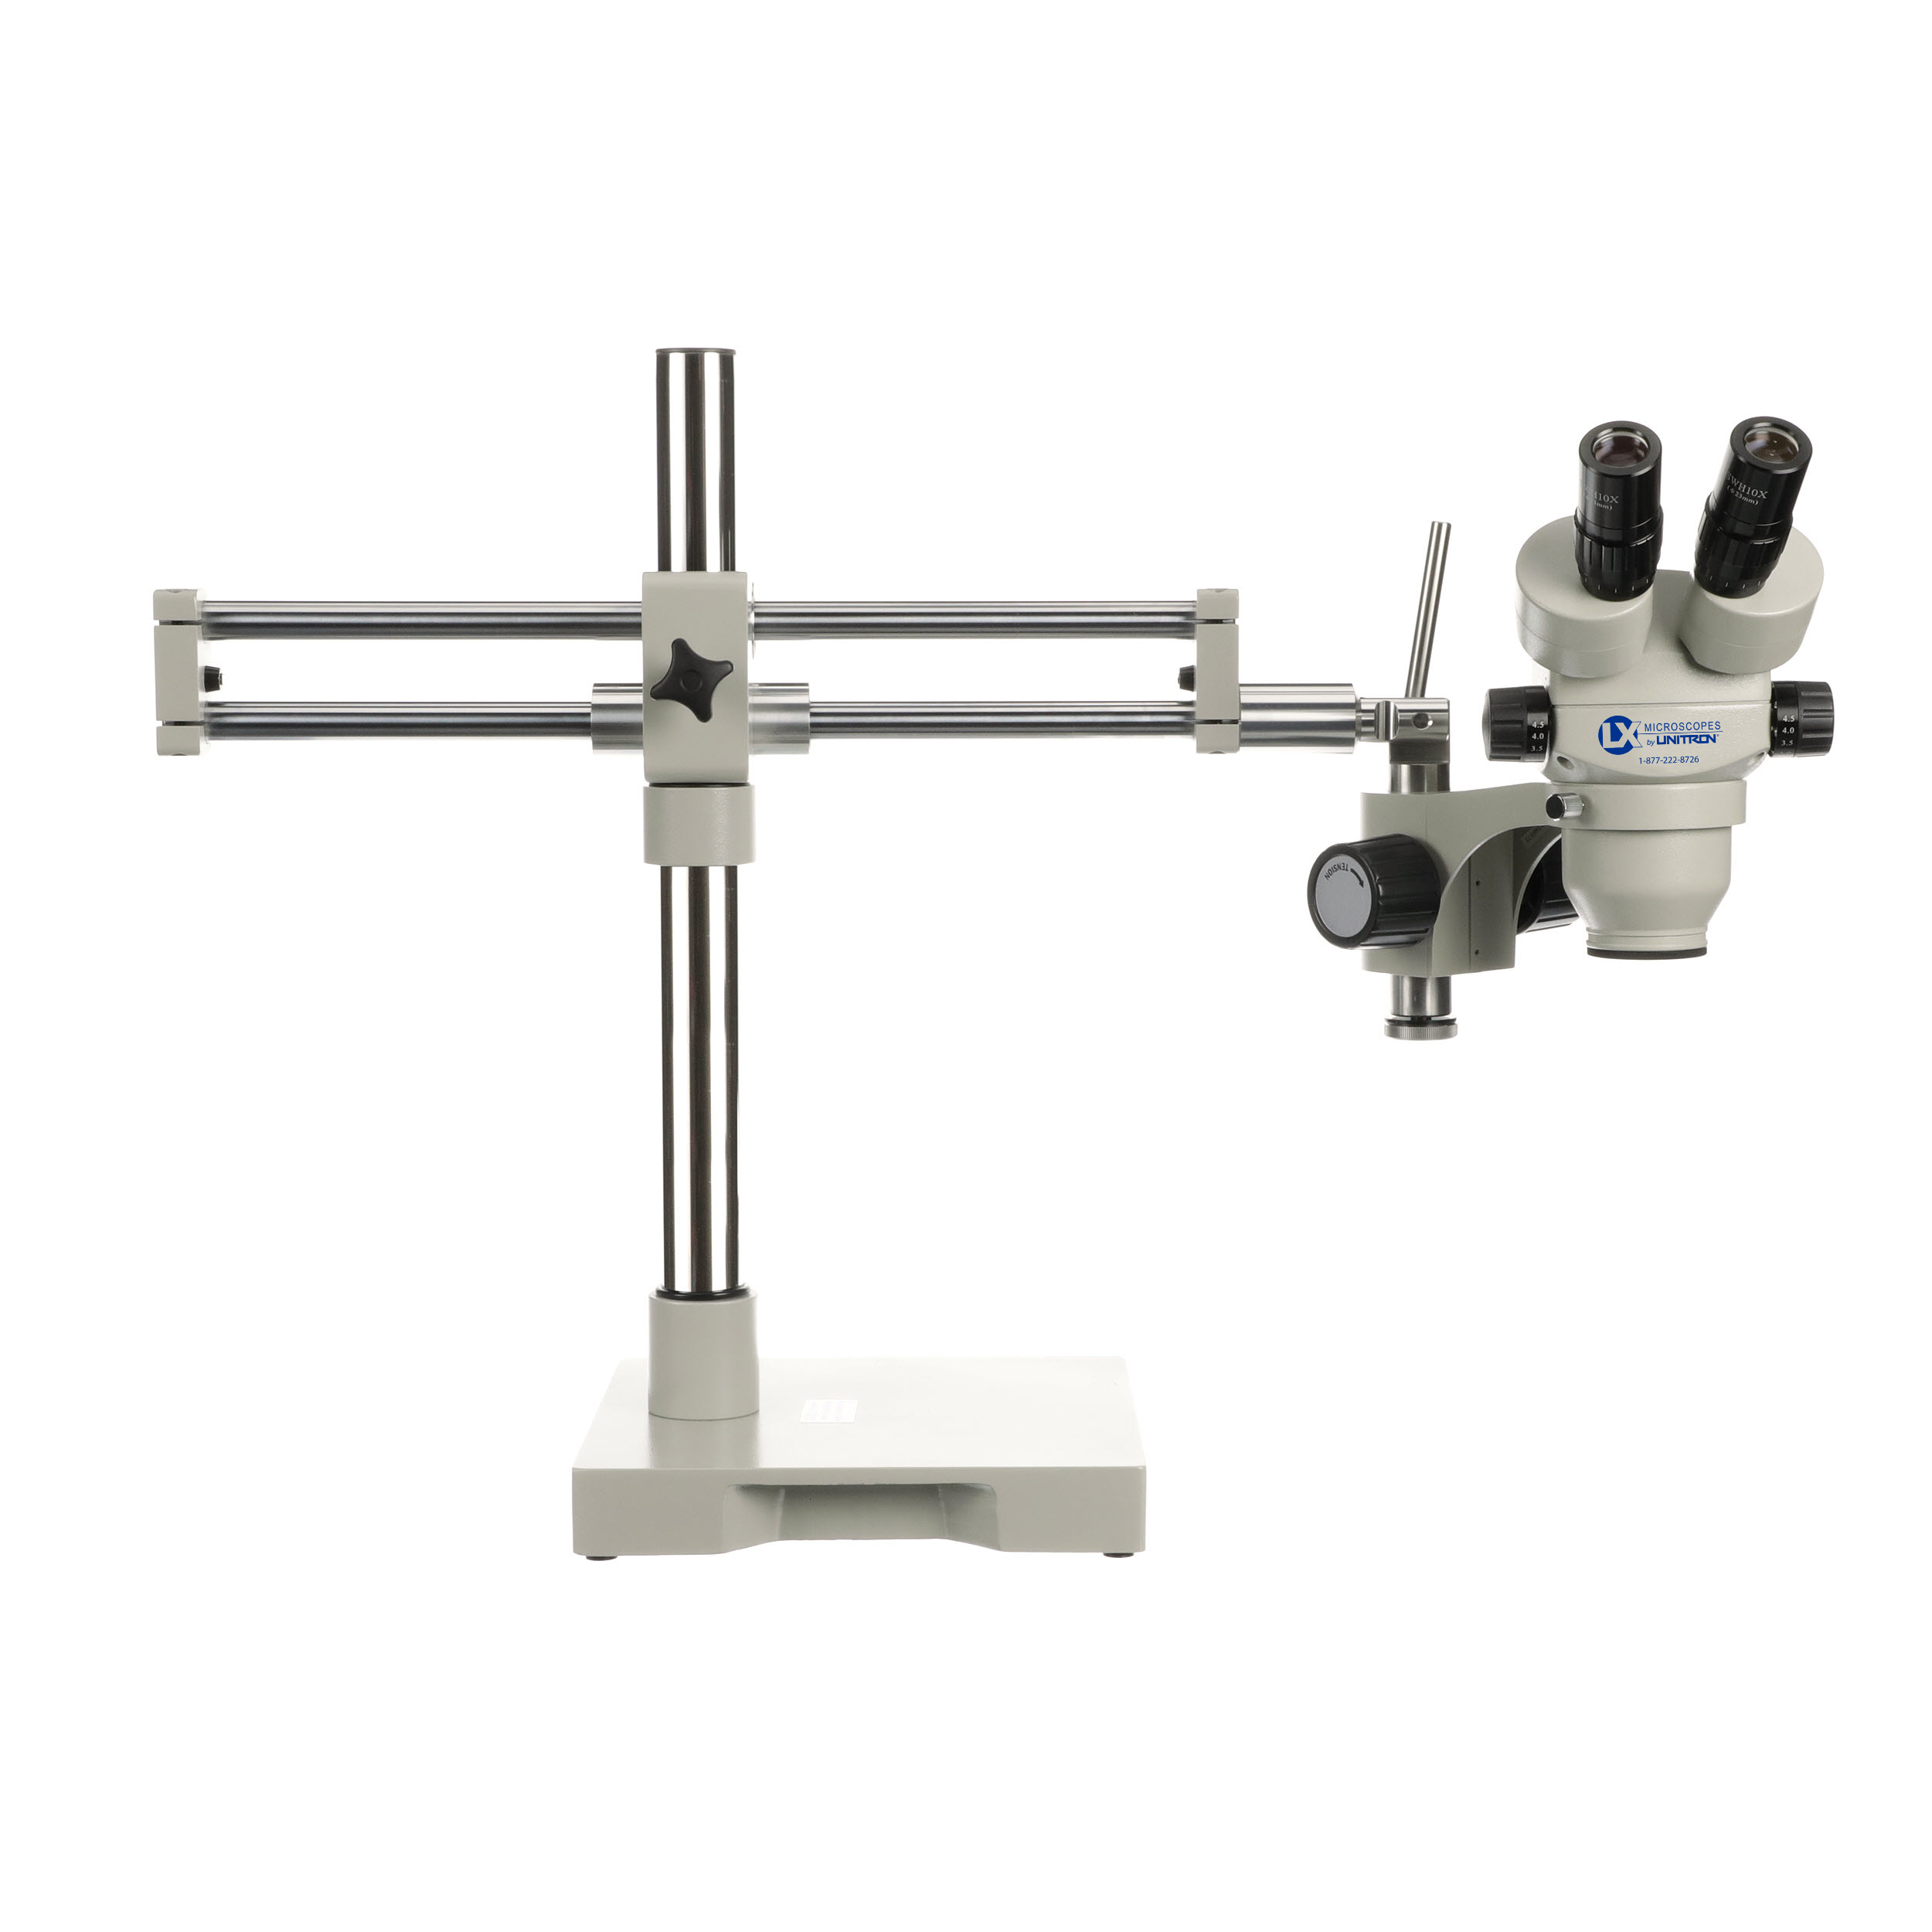 Weighted Base LX Microscopes K110670001 23W Task Light 45" 